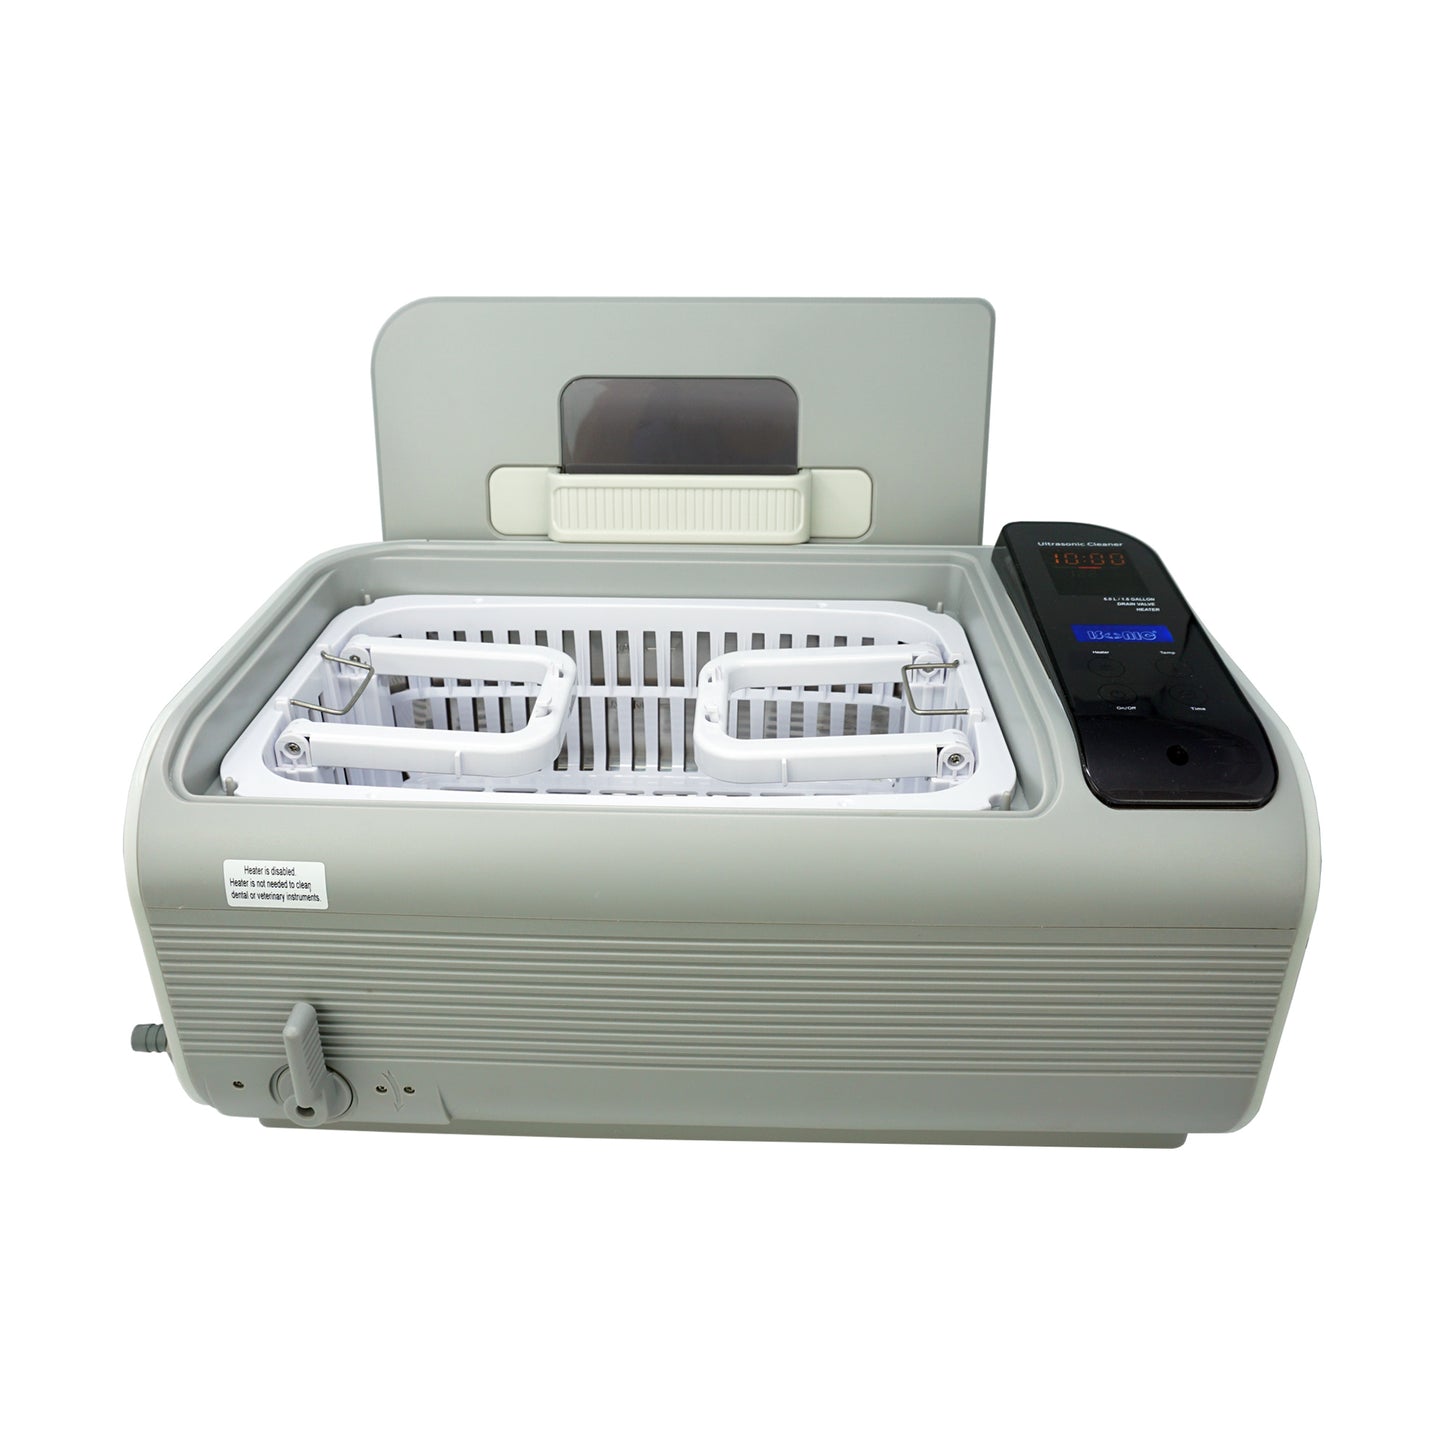 P4861 | iSonic® Ultrasonic Cleaner, 6L/1.6Gal, 110V, 30-minute timer, with heaters (Dental, Vet and medical please choose P4861-NH)